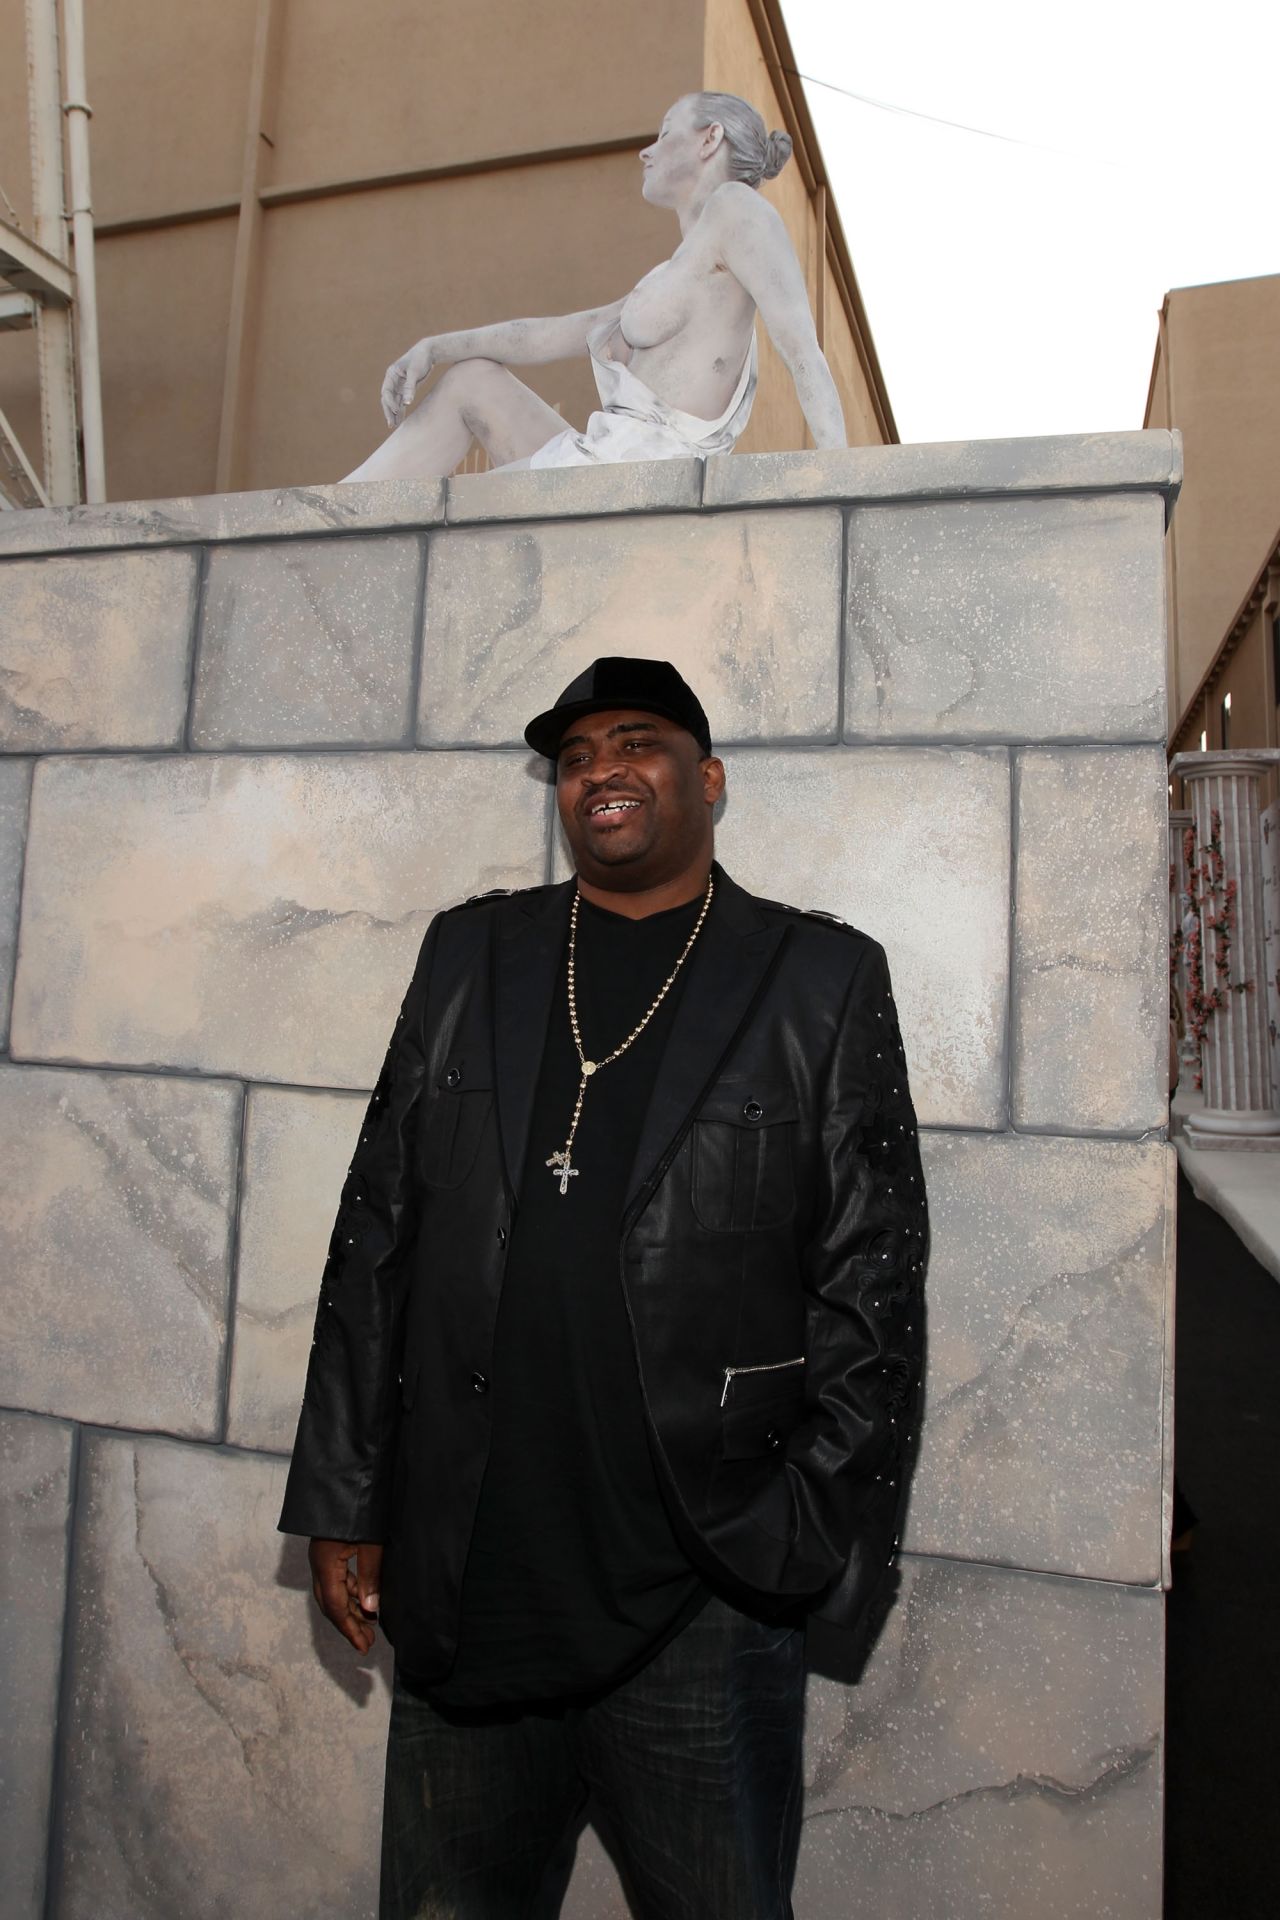 Comedian Patrice O'Neal died November 29 after suffering complications of a stroke that occurred more than a month earlier. He was 41. <a href="http://marquee.blogs.cnn.com/2011/11/29/comedian-patrice-oneal-dies/">Full story</a>